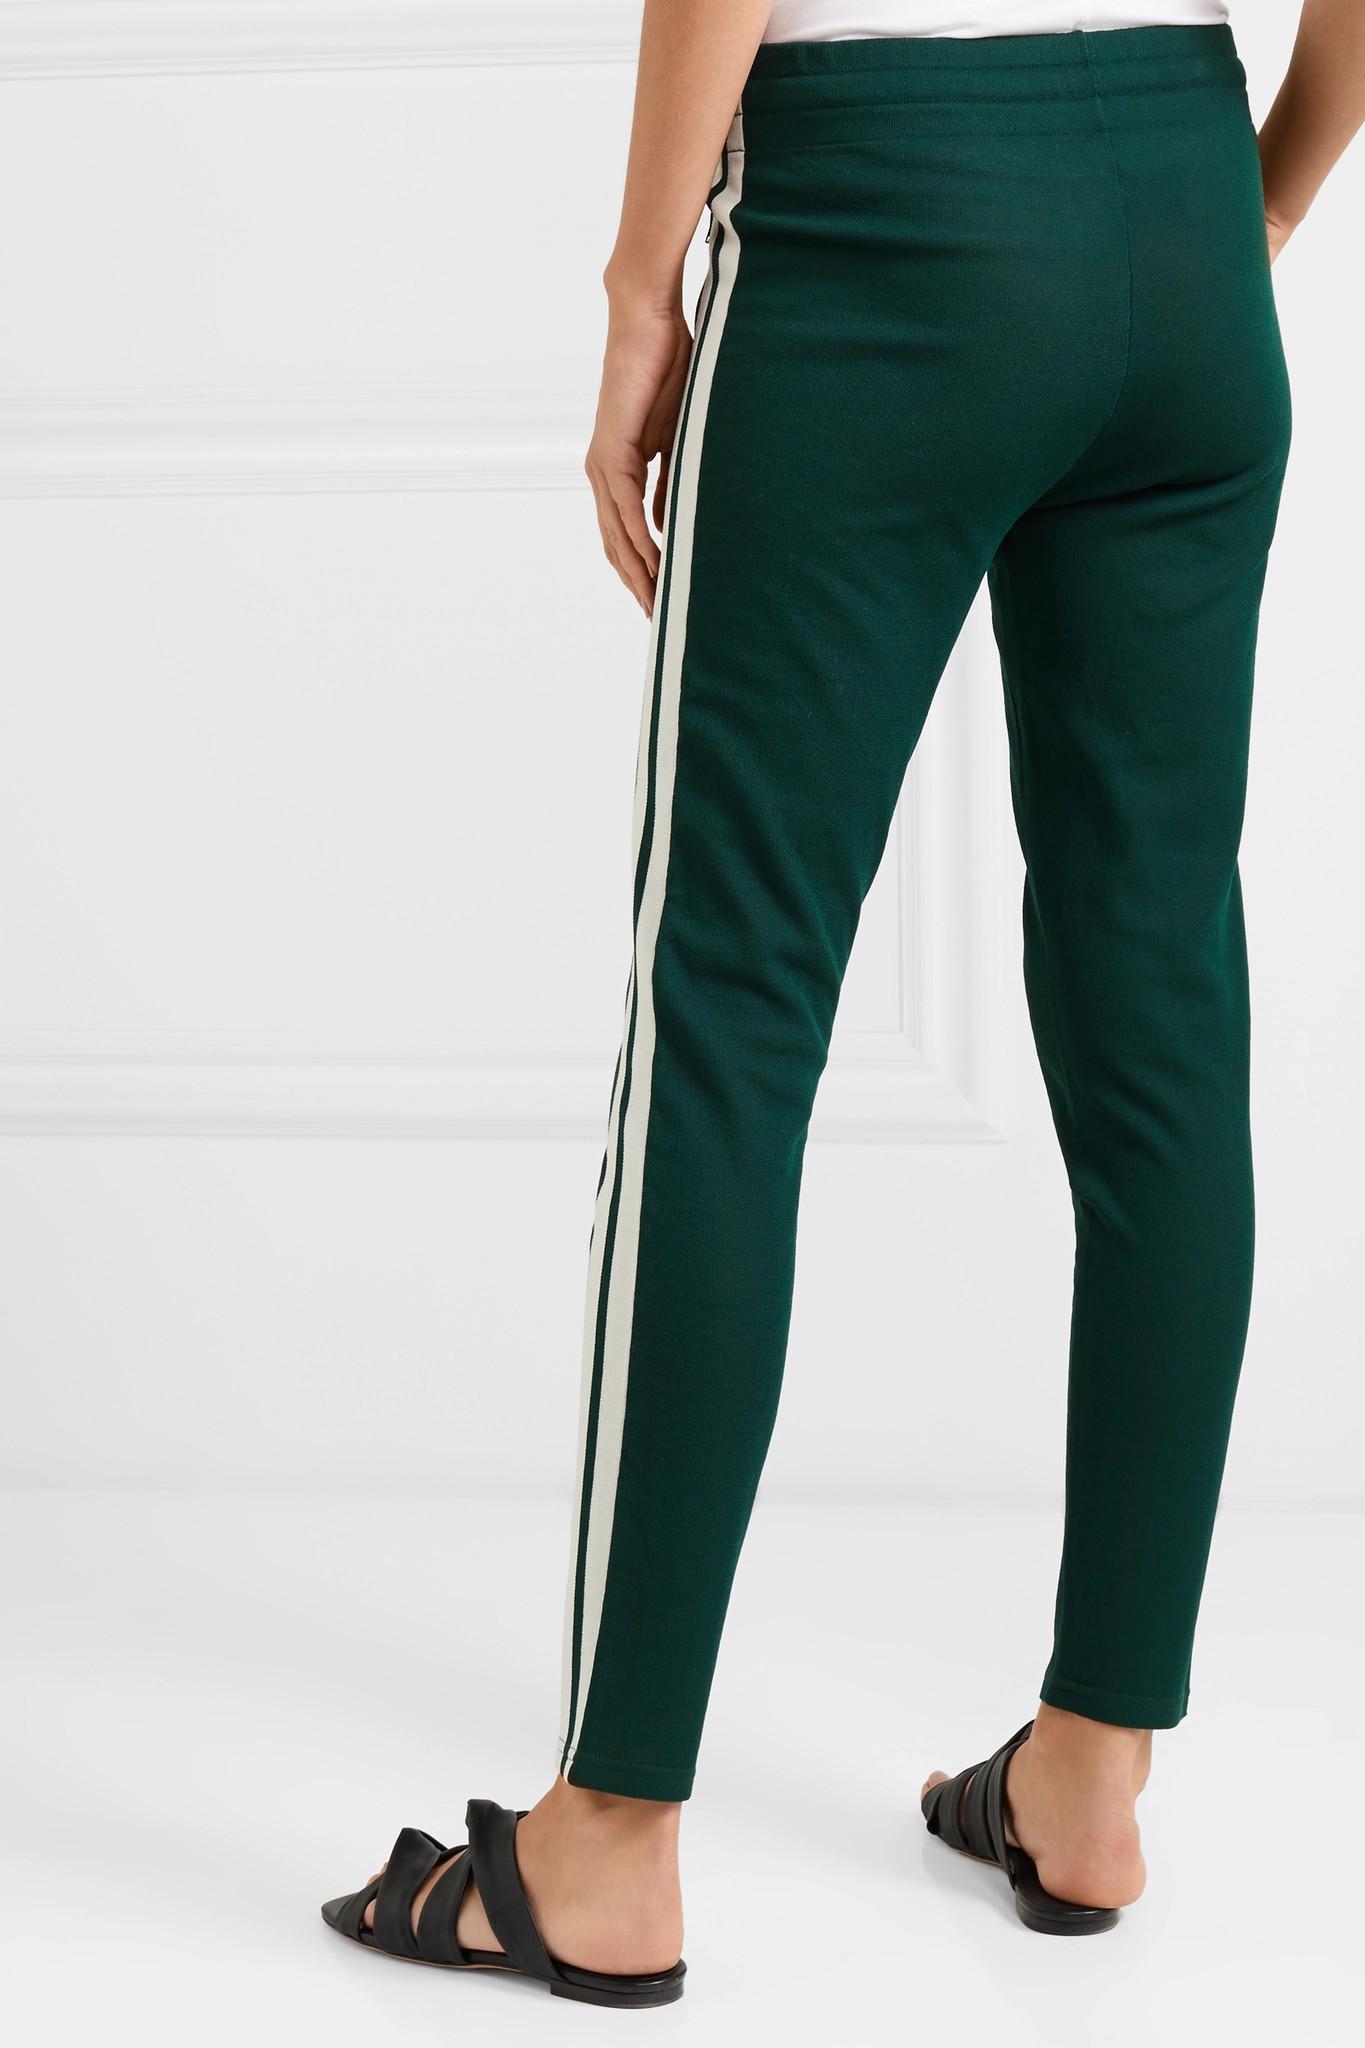 Étoile Marant Striped Jersey Track Pants in Forest Green (Green) - Lyst